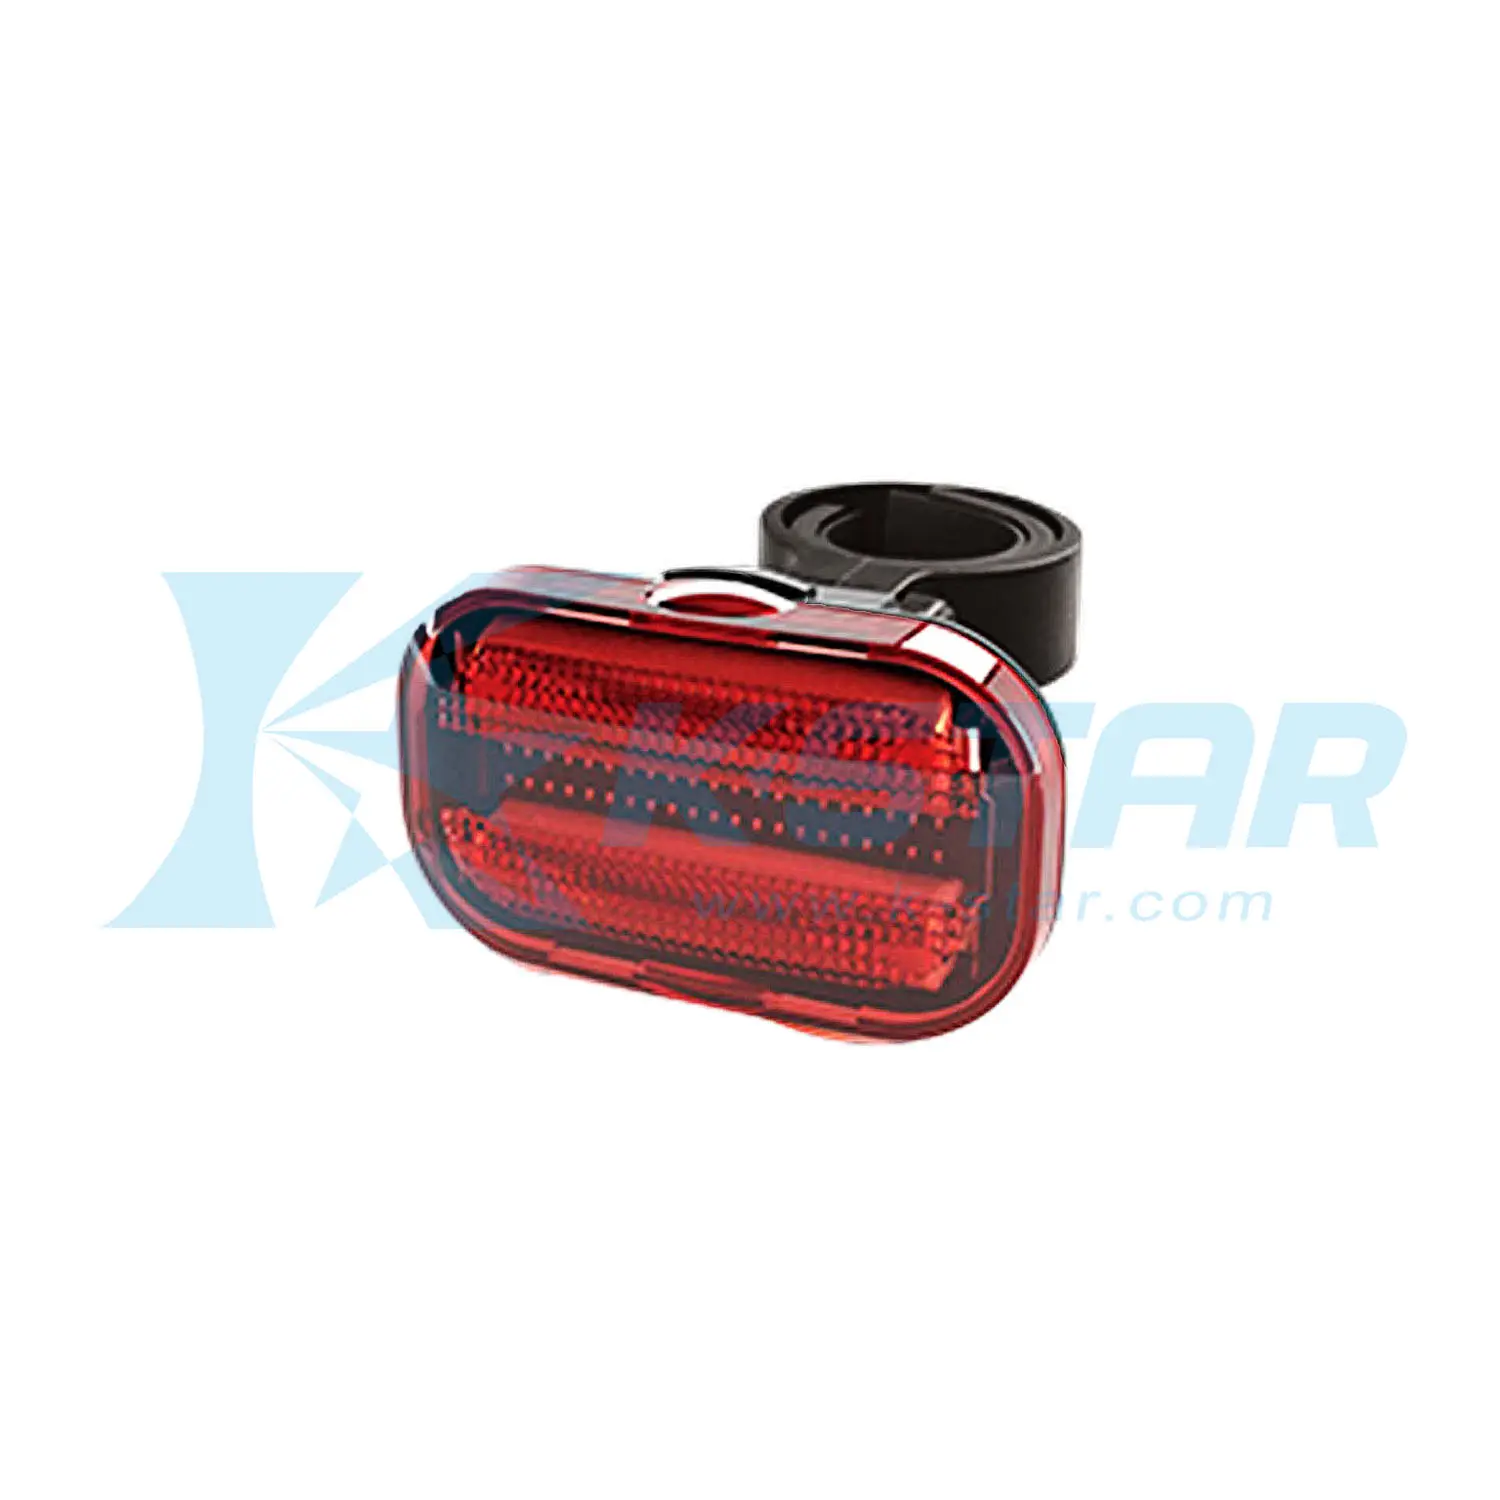 Tail Lamp Rear Light 5 Super Bright Red LED Bicycle